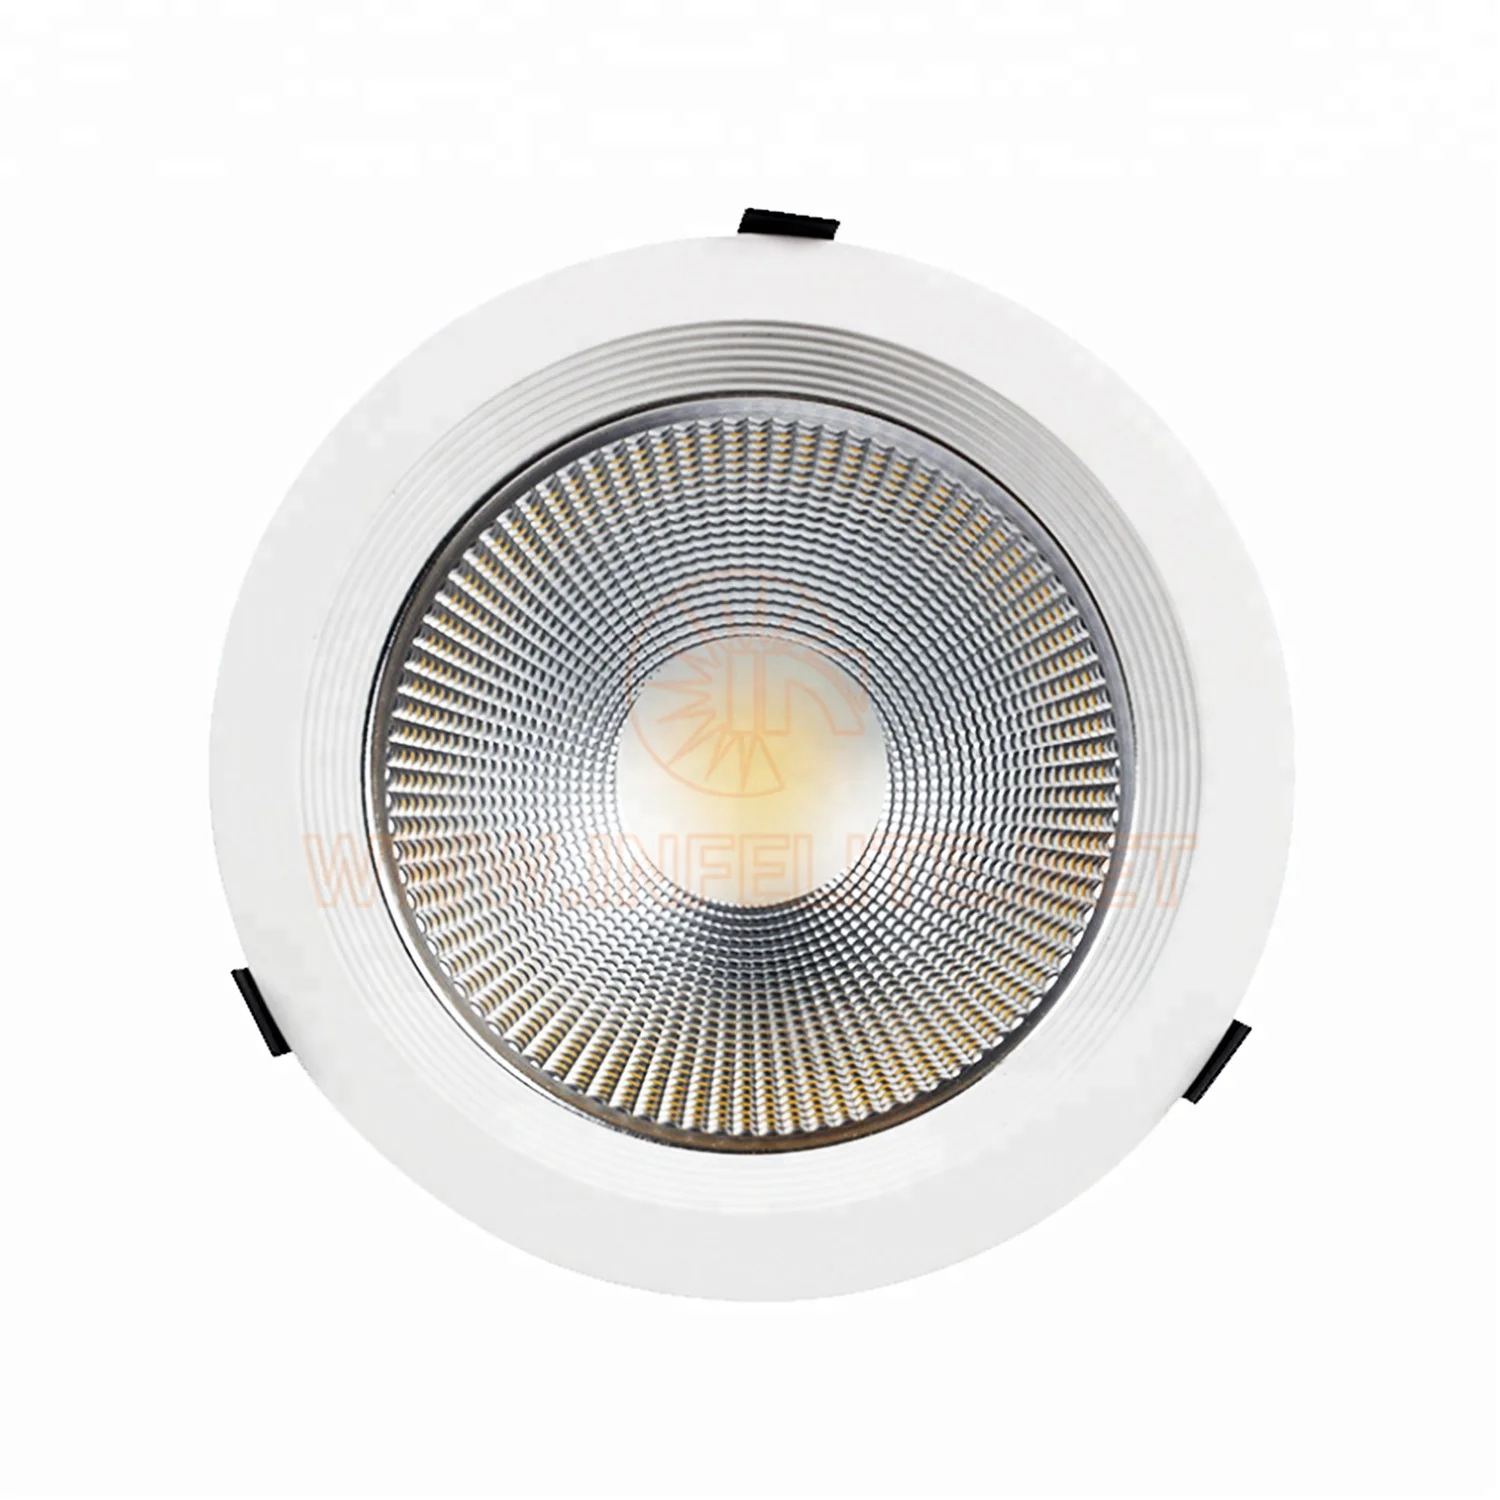 IN-DL101 Home Office Die Cast Aluminum Round Recessed COB LED Ceiling Downlight Down Light Lamp 10W 15W 20W 25W 30W